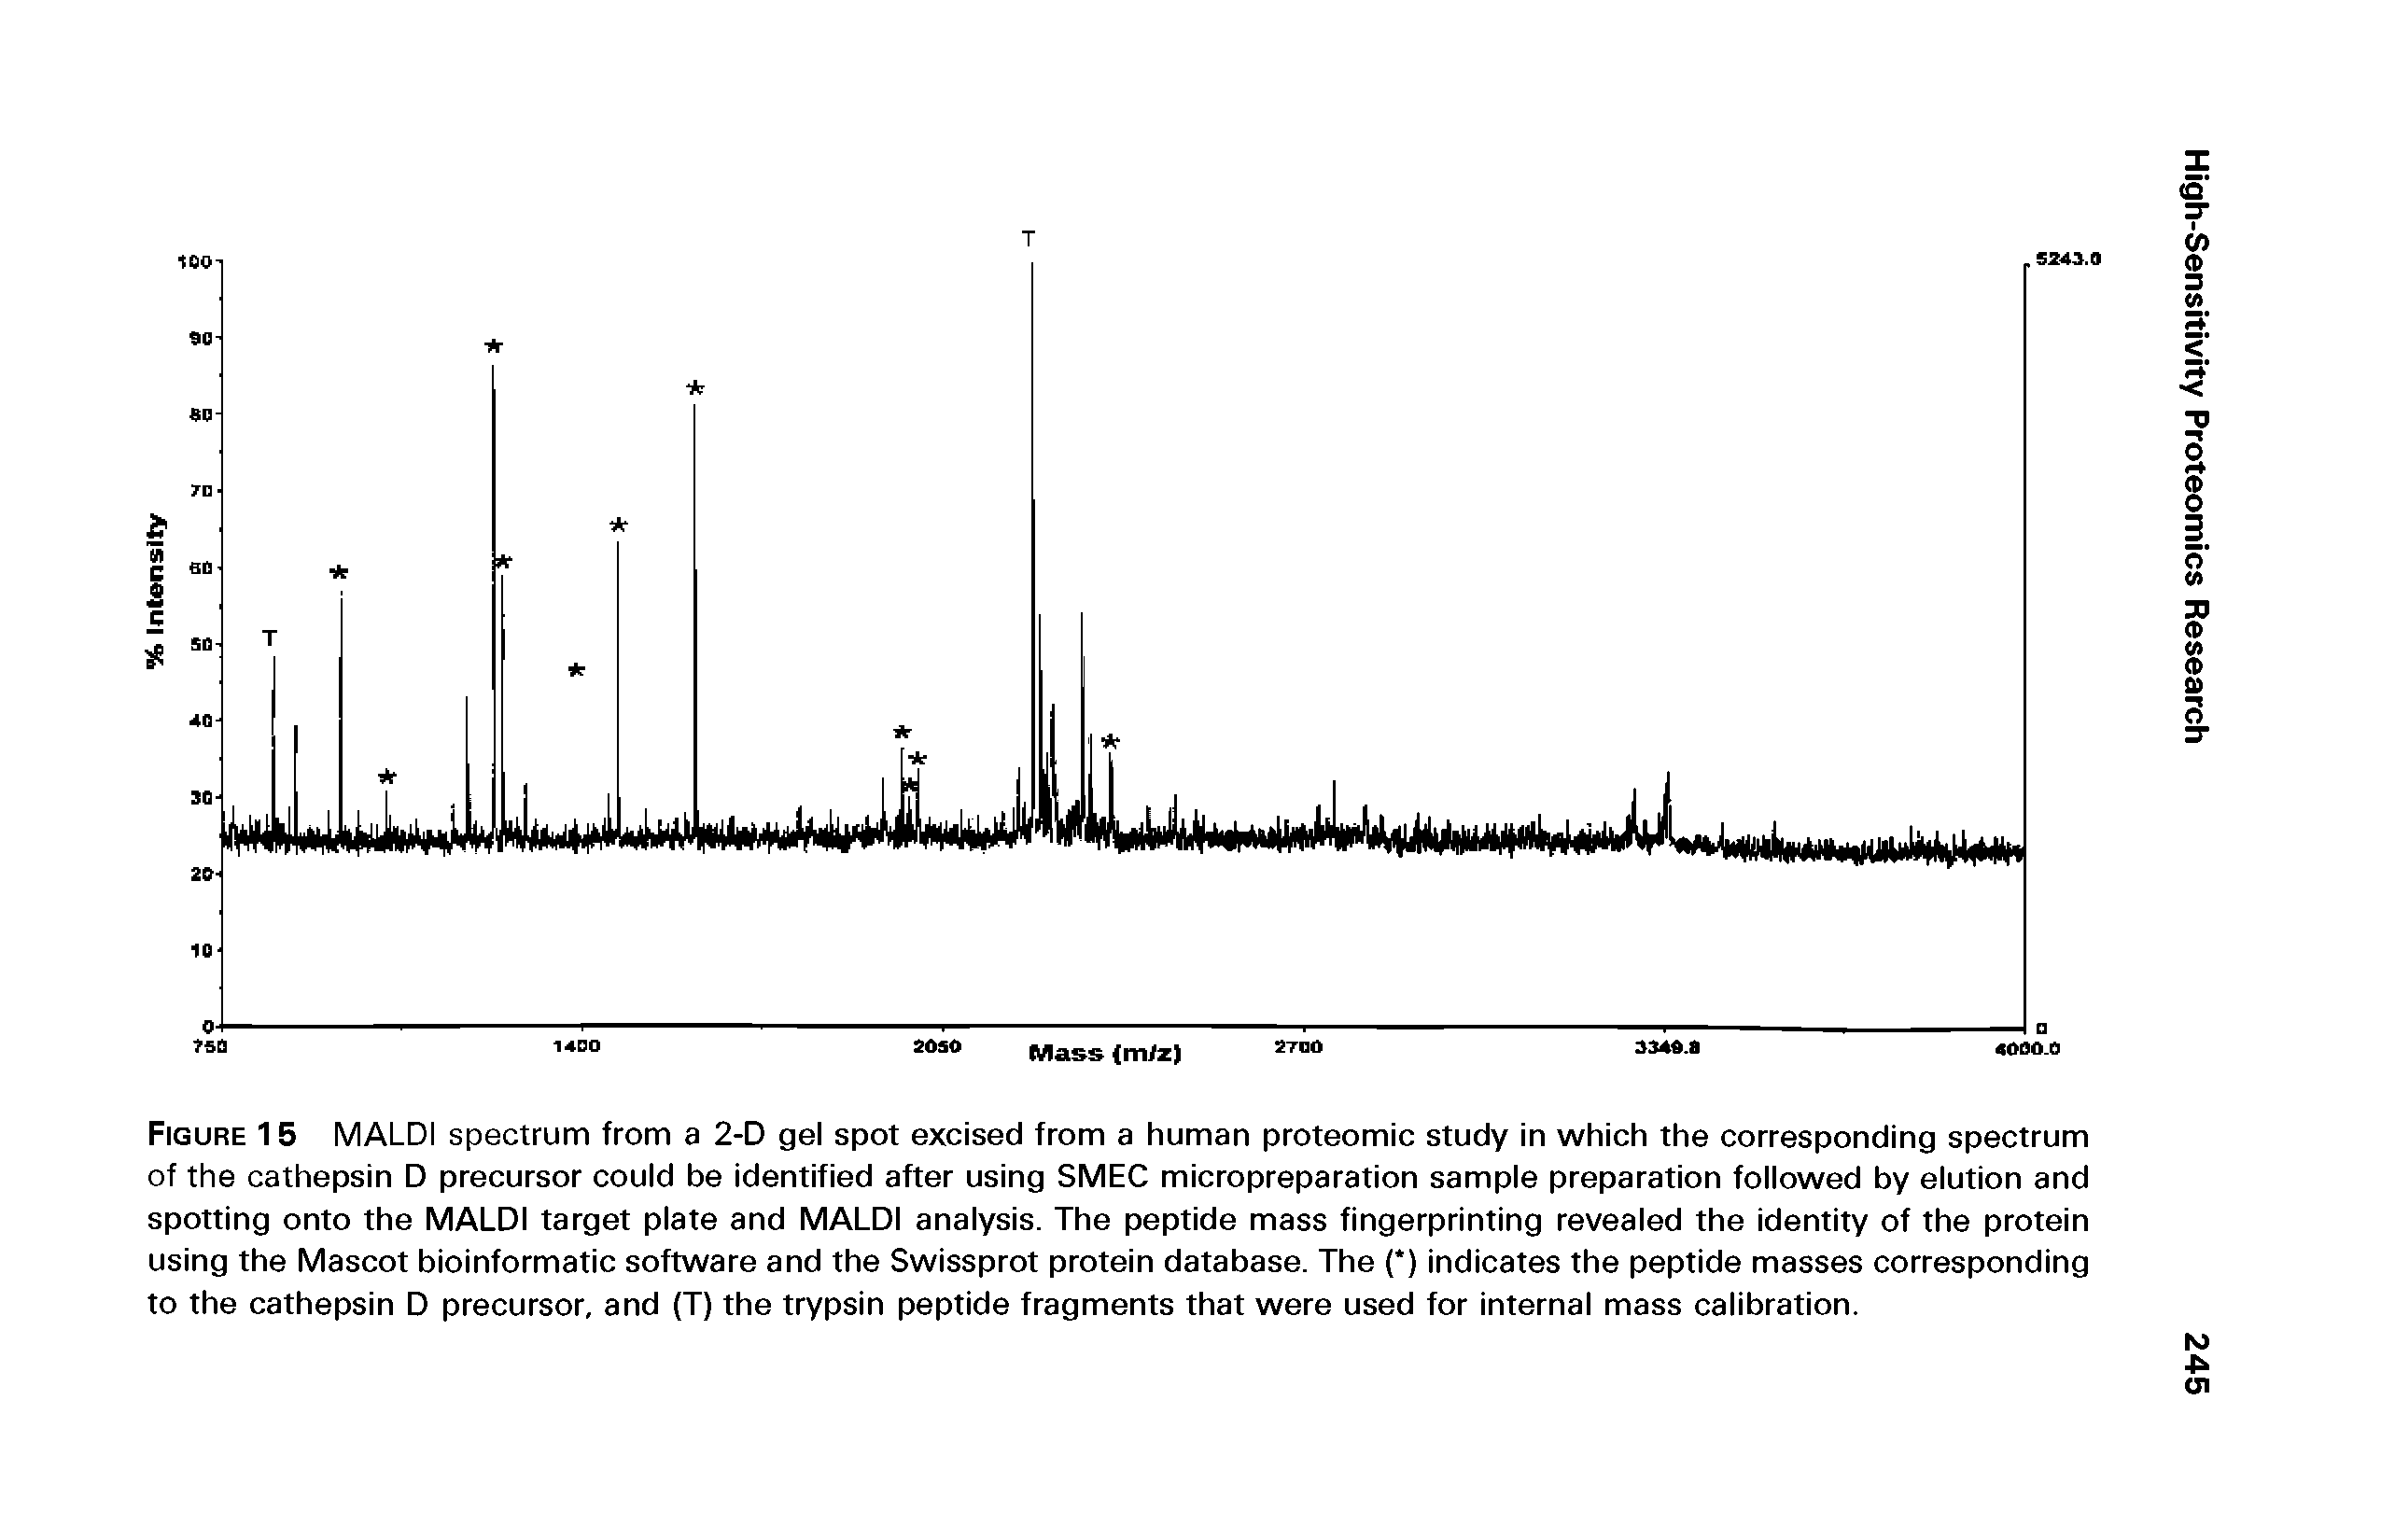 Figure 1 5 MALDI spectrum from a 2-D gel spot excised from a human proteomic study in which the corresponding spectrum of the cathepsin D precursor could be identified after using SMEC micropreparation sample preparation followed by elution and spotting onto the MALDI target plate and MALDI analysis. The peptide mass fingerprinting revealed the identity of the protein using the Mascot bioinformatic software and the Swissprot protein database. The ( ) indicates the peptide masses corresponding to the cathepsin D precursor, and (T) the trypsin peptide fragments that were used for internal mass calibration.